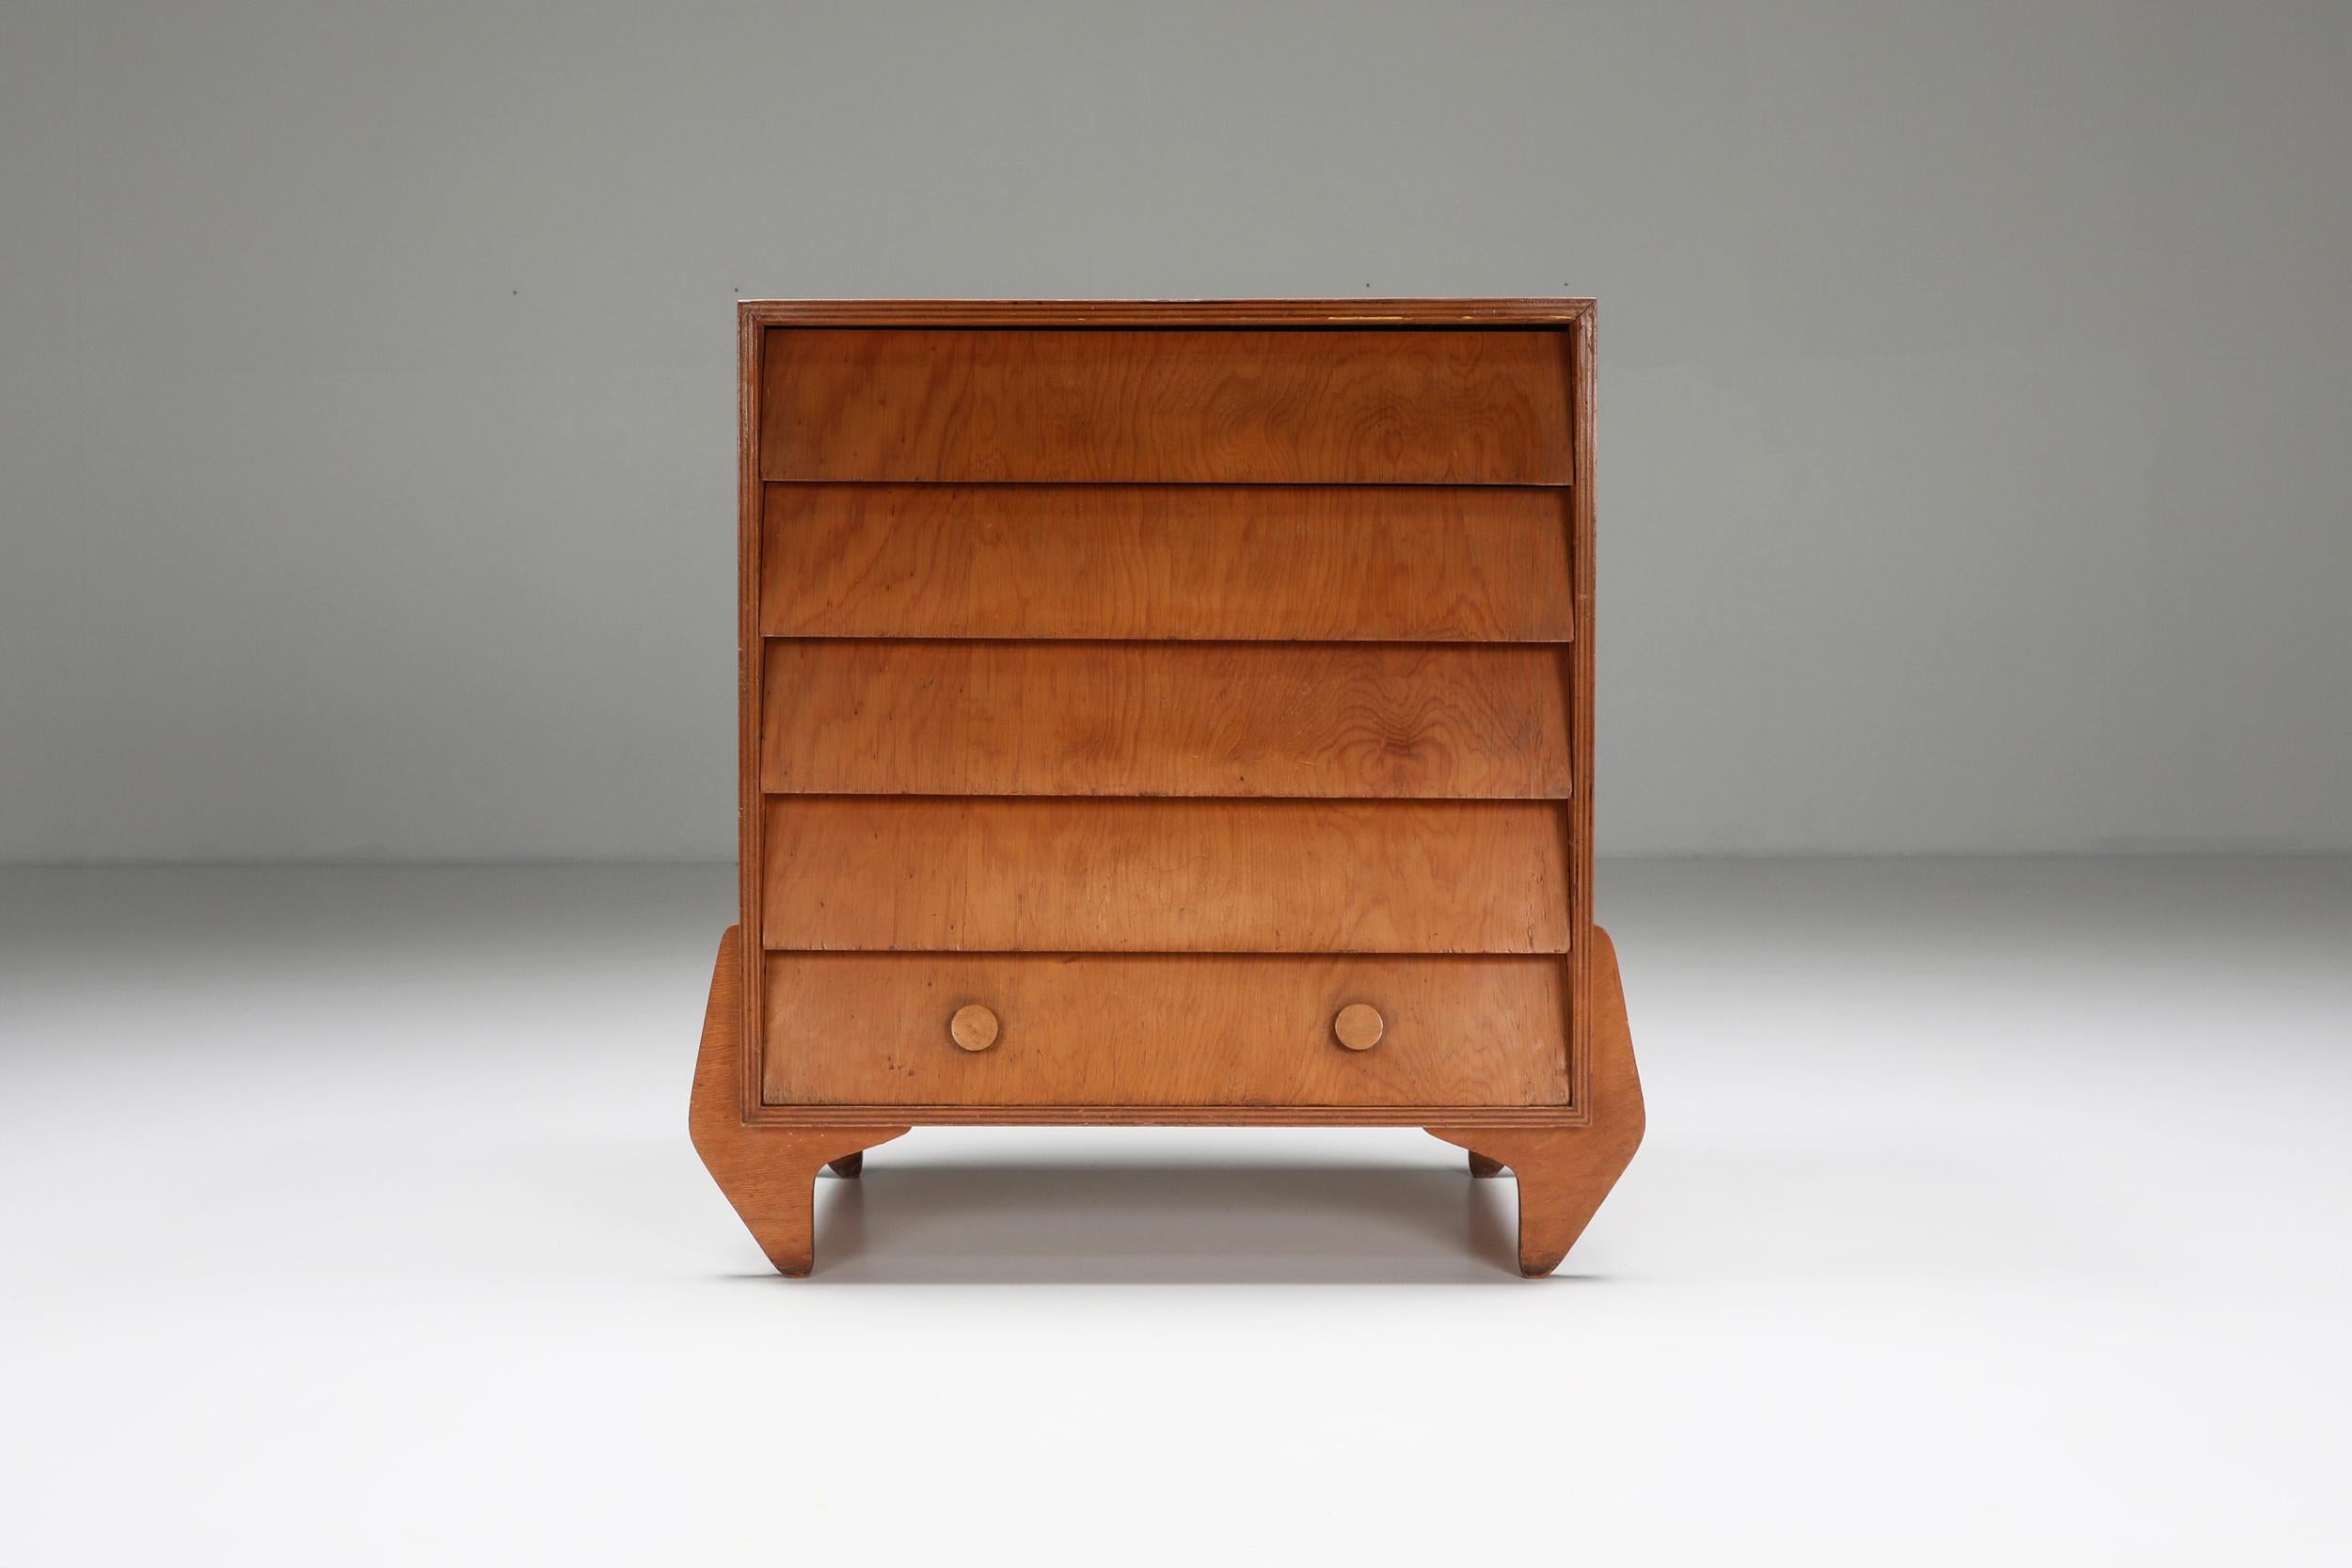 Jose Zanine Caldas; Commode; Mid Century Modern; Brazilian Design; 1970s;

A sought-after piece in very good condition. This wooden commode with its geometric shapes features a sculptural look.

A self-taught artist, designer, and architect, Jose